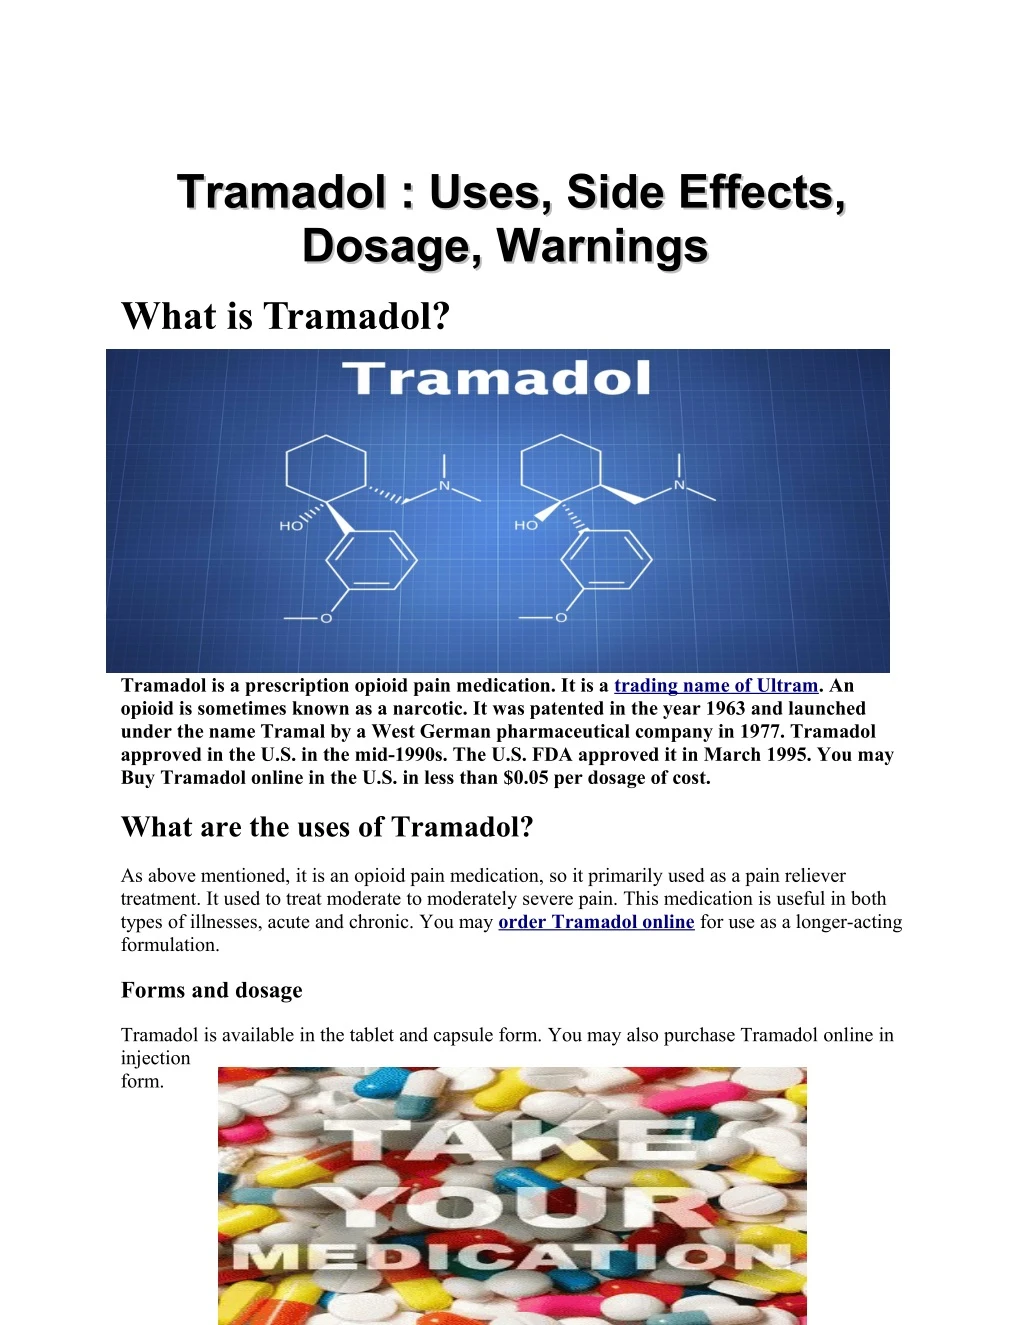 tramadol uses side effects tramadol uses side